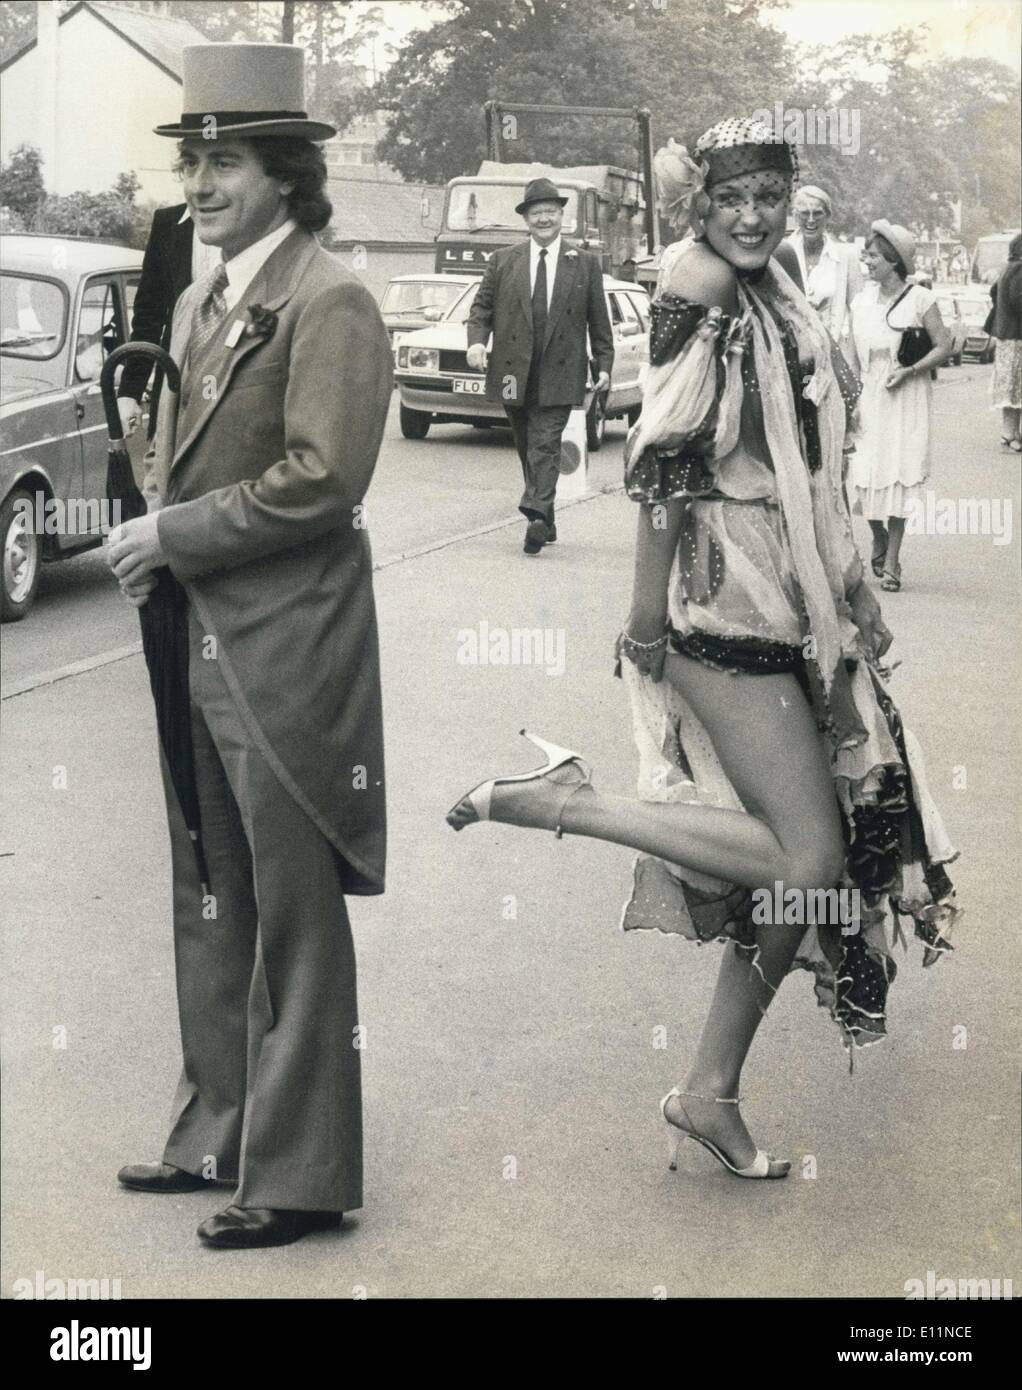 Jun. 21, 1979 - Ascot Fashions Photo Shows:- Model Tinera Dunscombe shows a leg unnoticed by race goer, at Ascot today. Stock Photo